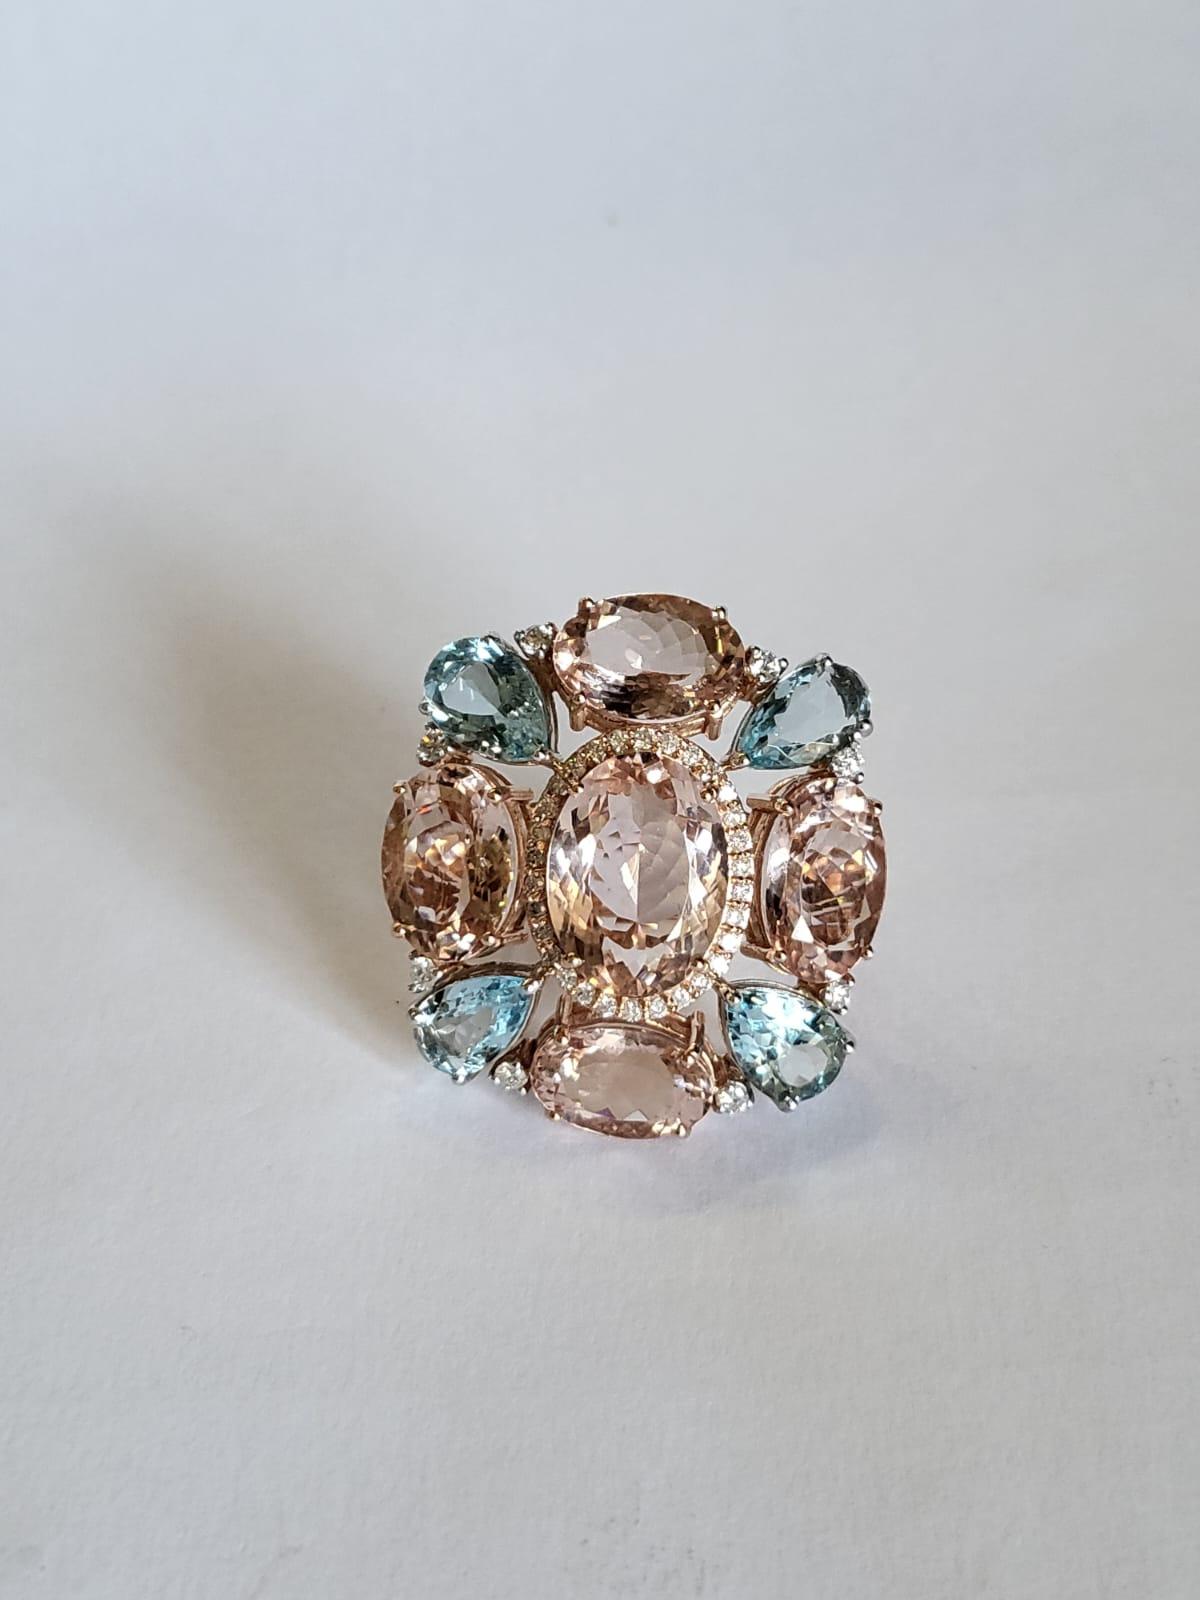 A very gorgeous and one of a kind, Aquamarine & Morganite Cocktail Ring set in 18K Rose Gold & Diamonds. The weight of the Oval shaped Morganites is 18.67 carats. The weight of the Pear shaped Aquamarines is 4.59 carats. The weight of the Diamonds